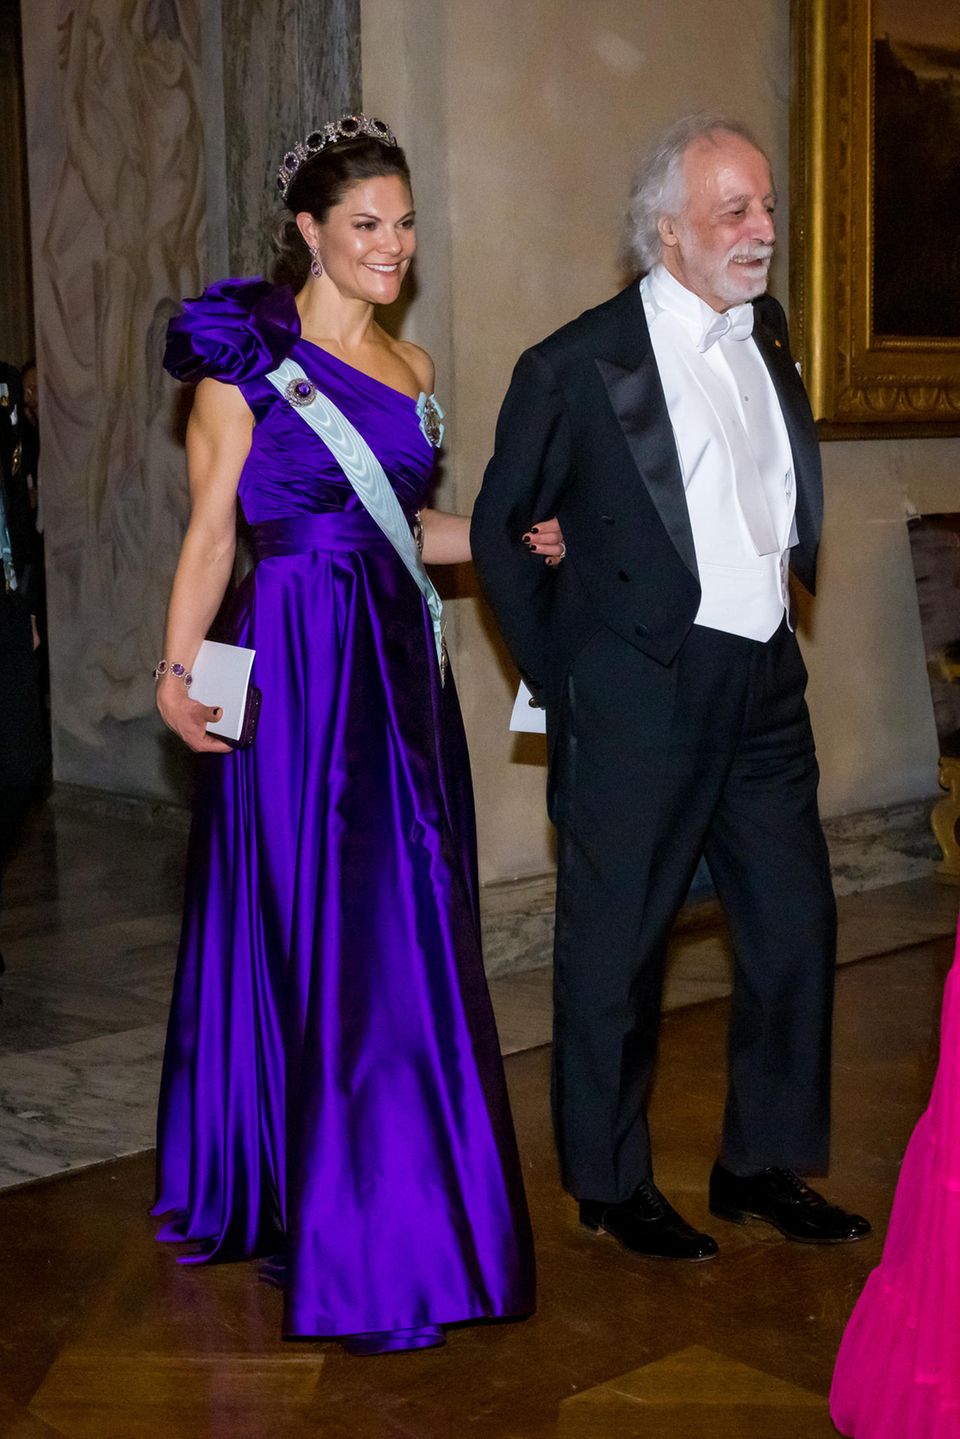 Tight shoulders, radiant smile: Victoria of Sweden knows how to captivate the guests at the Nobel Prize Gala. 